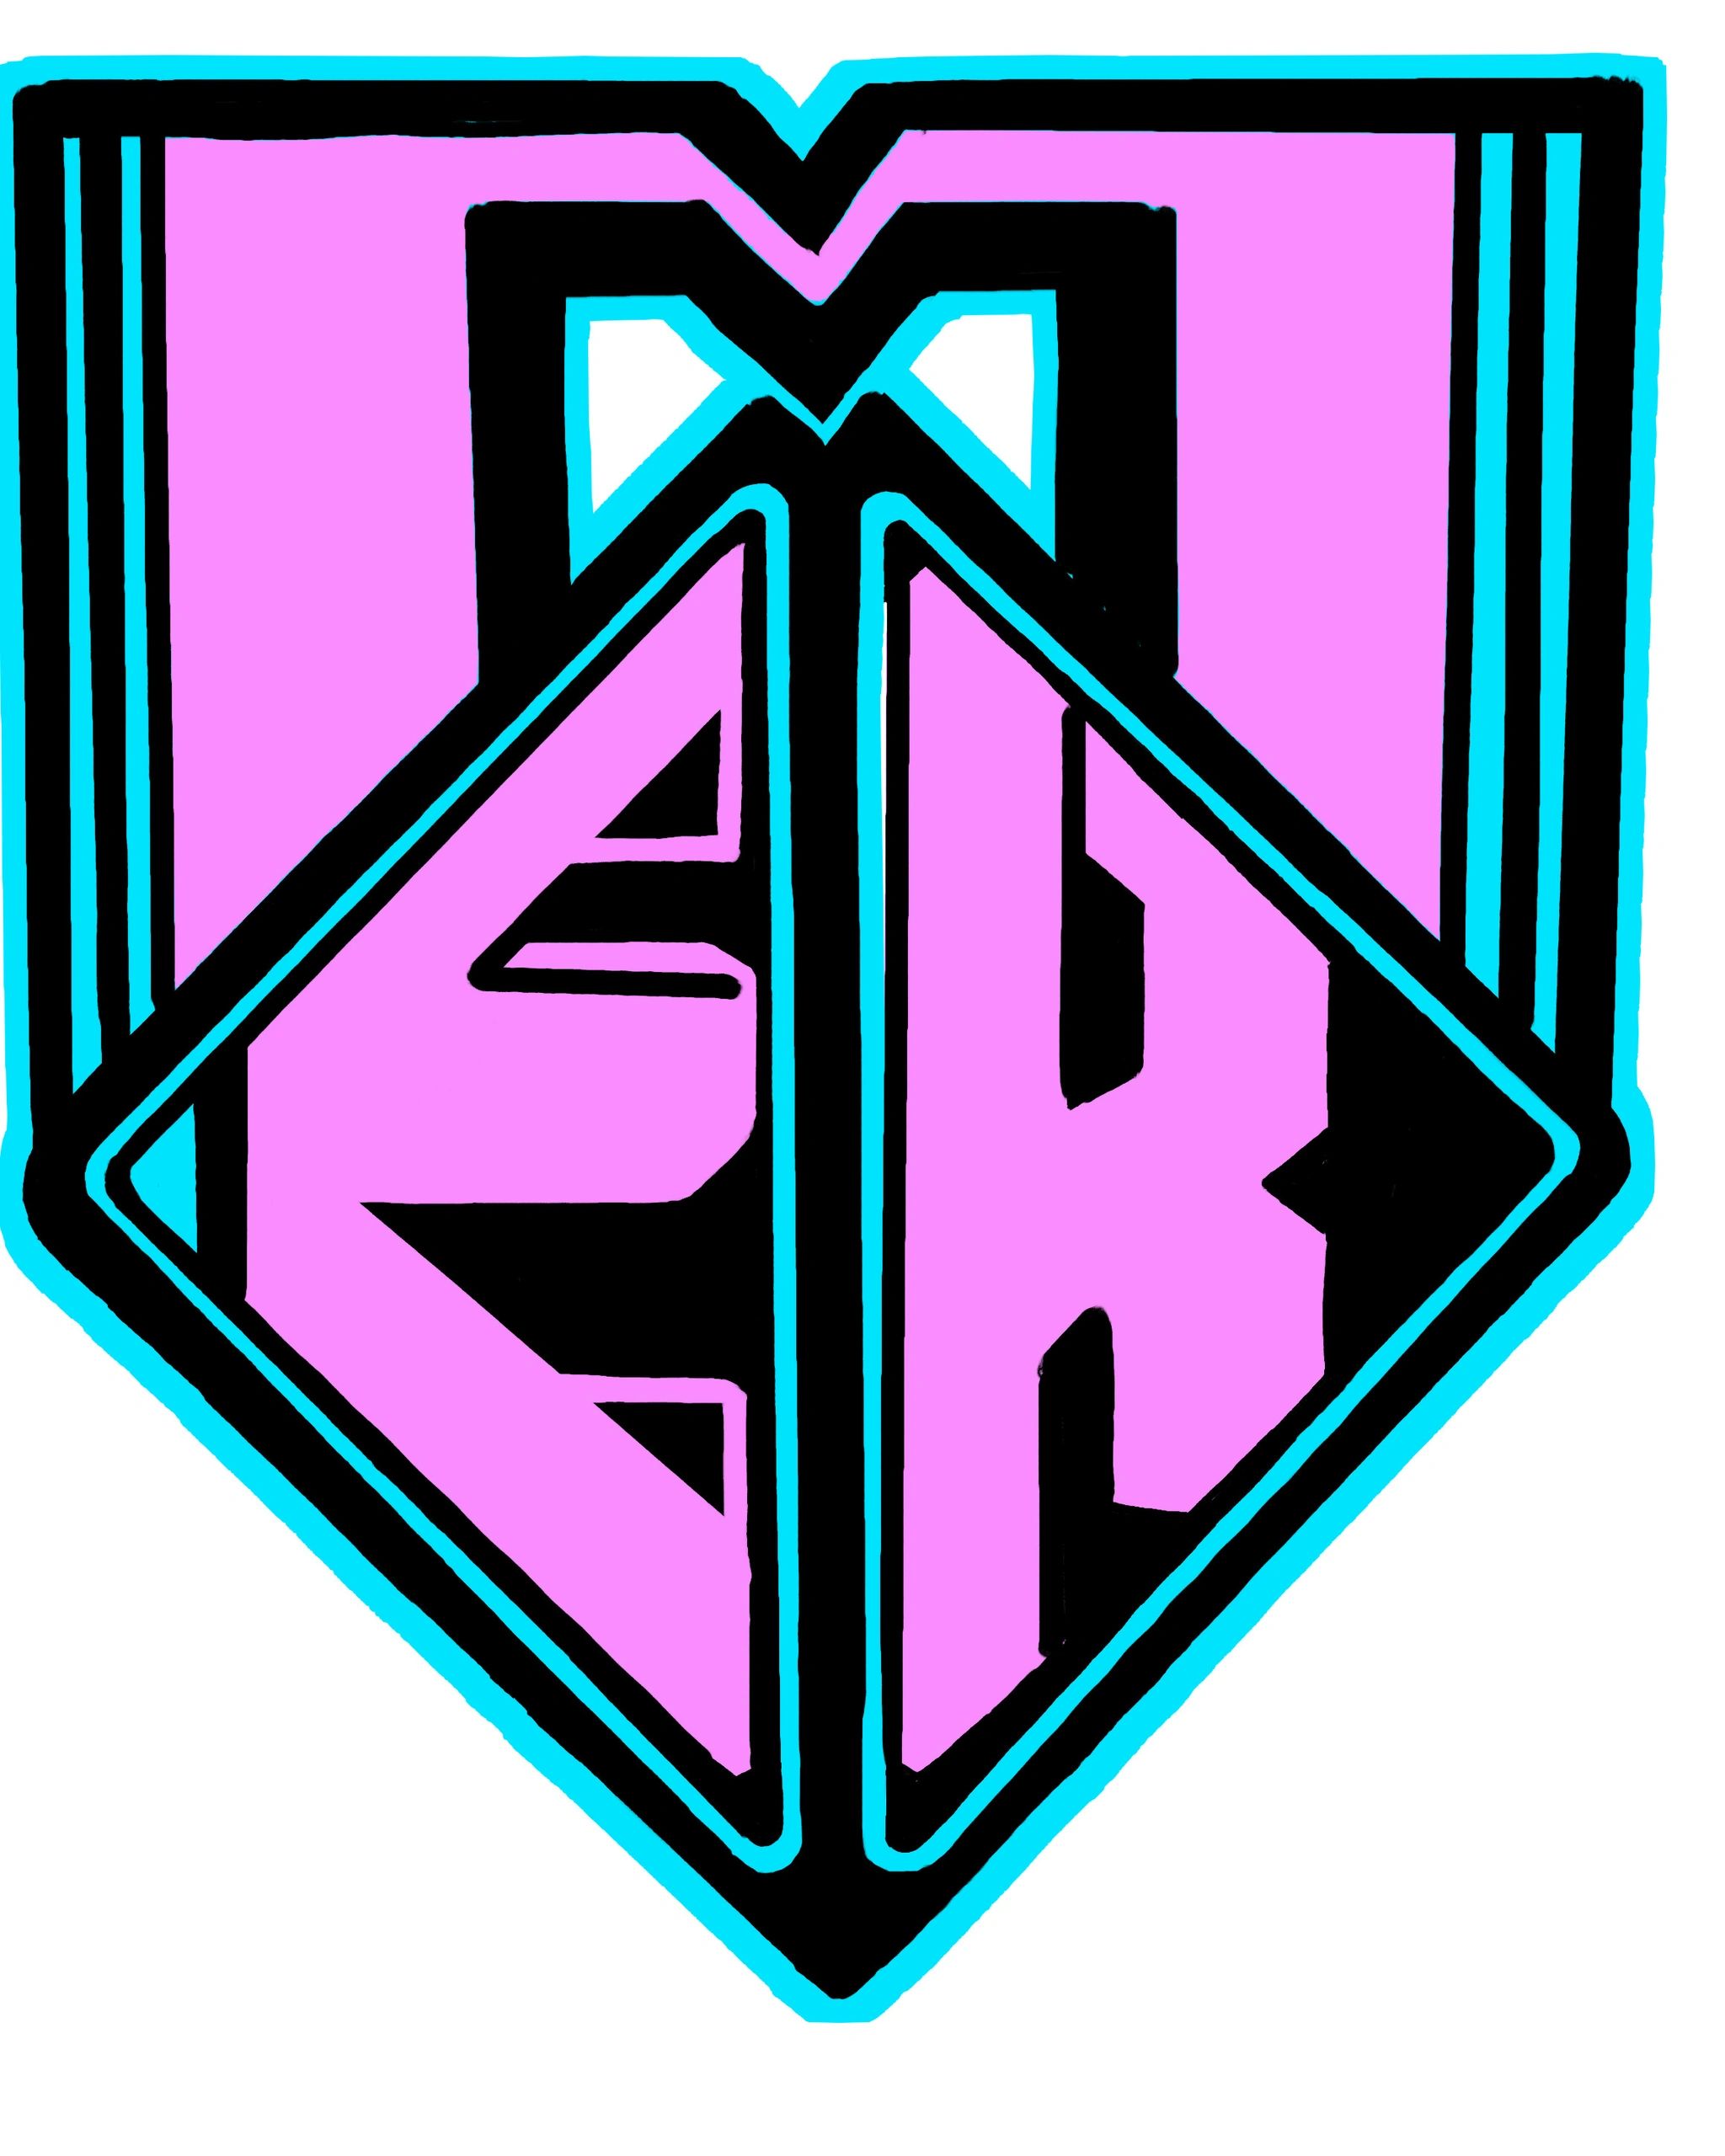 The ERM logo if don’t know now you know.